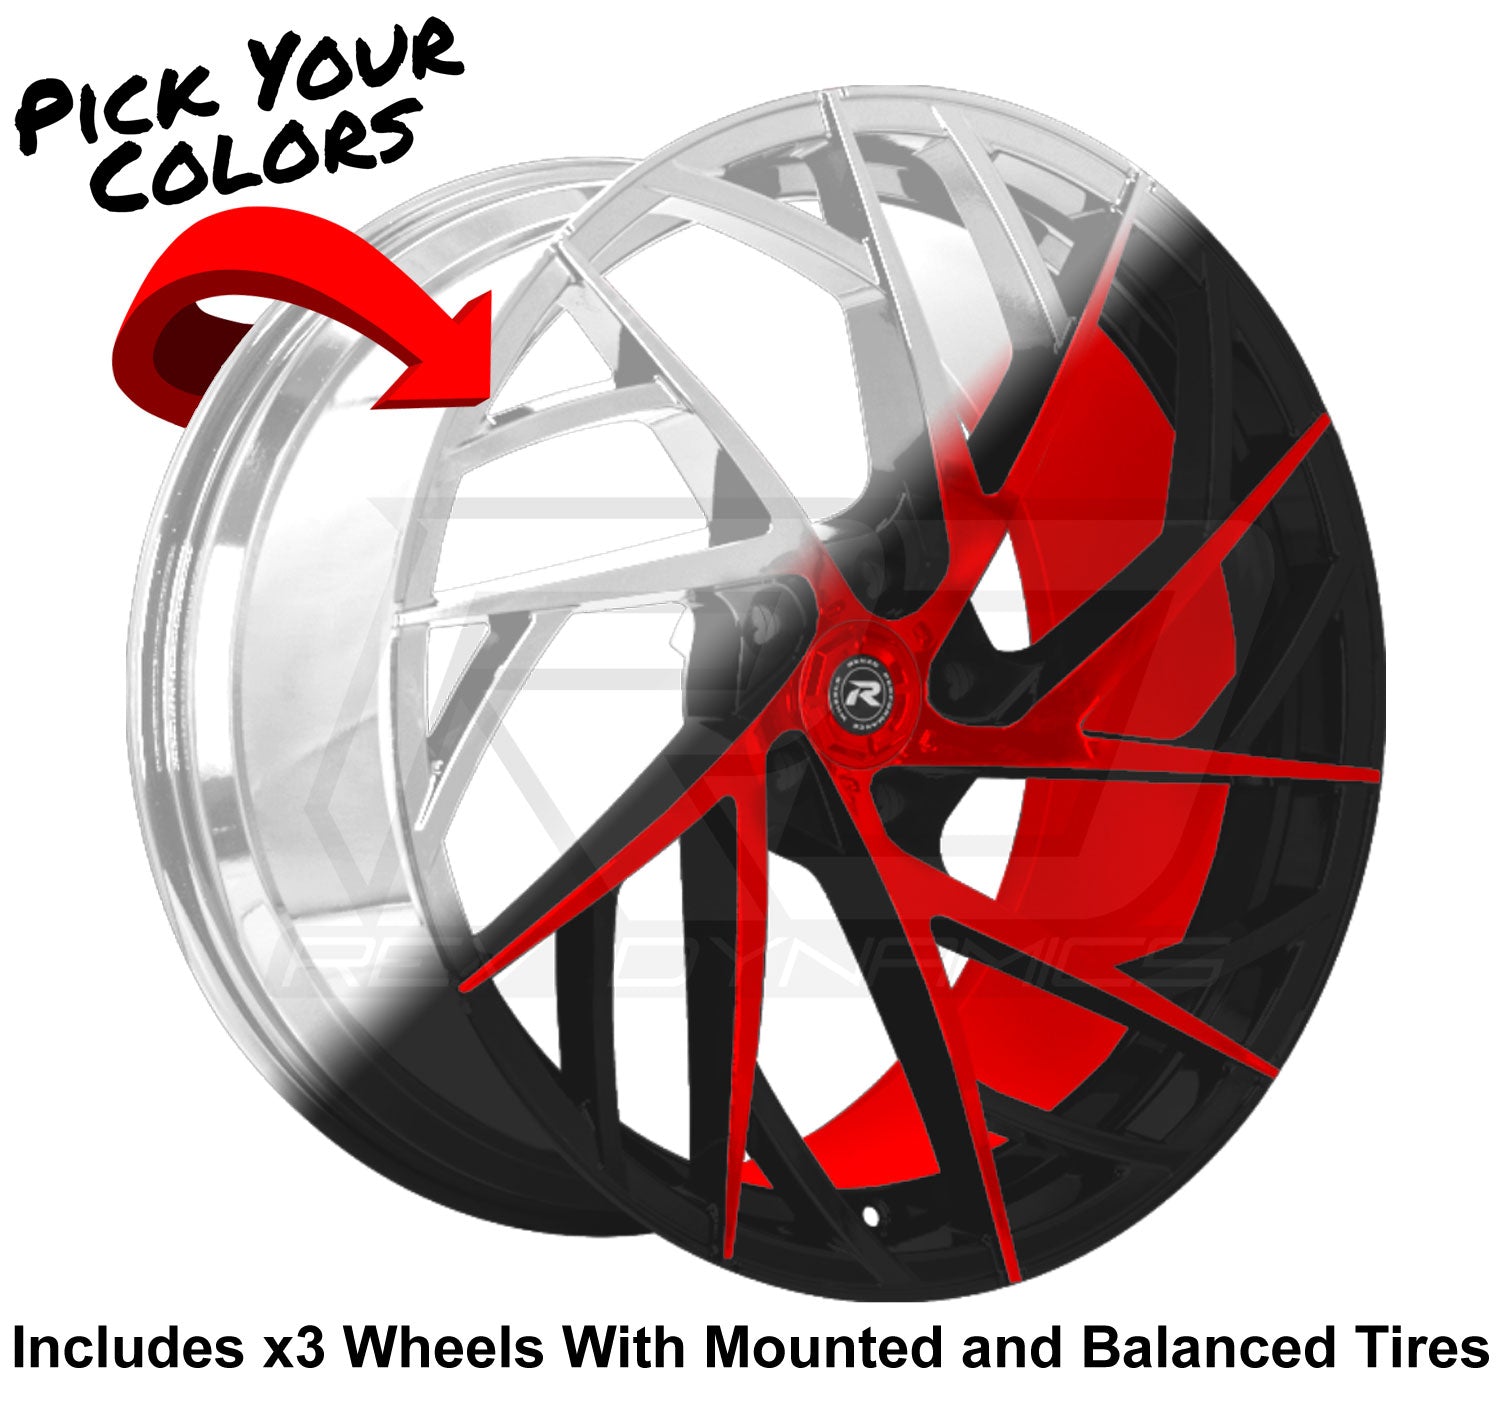 Red and Black Two Toned Polaris Slingshot Wheel